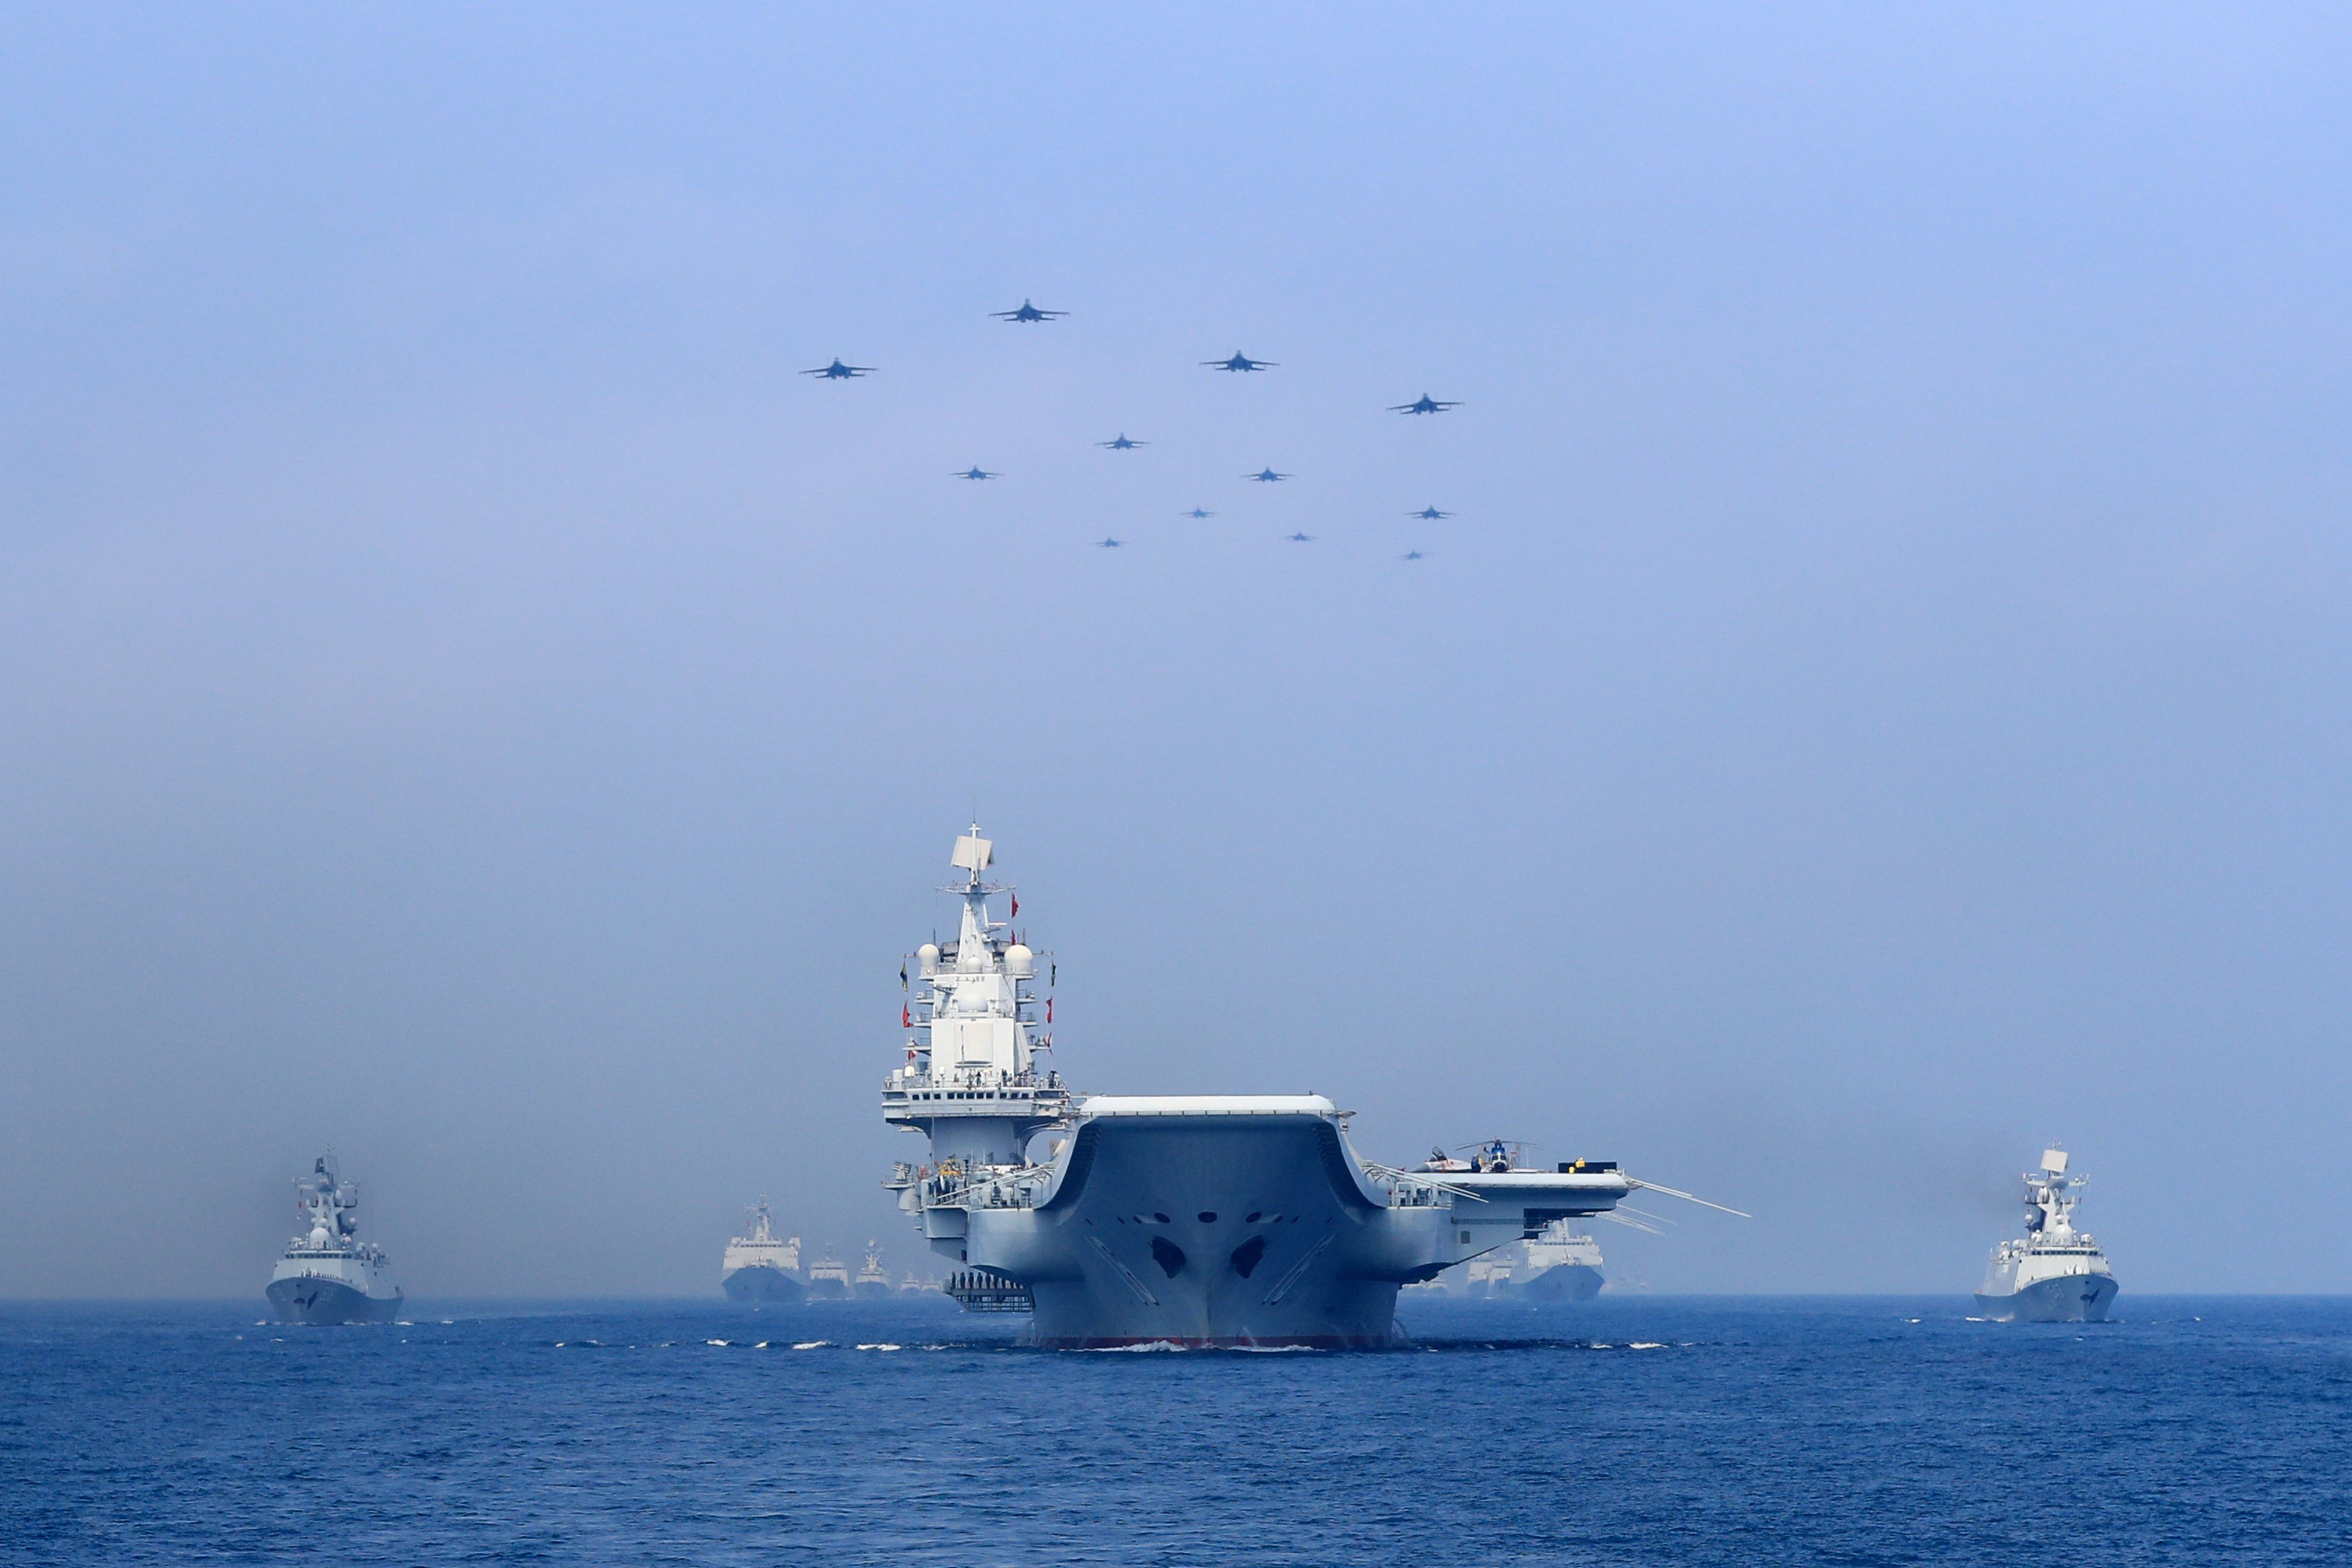 Warships and fighter jets of the Chinese People’s Liberation Army (PLA) Navy taking part in a military display in the South China Sea on April 12, 2018. Photo: Reuters